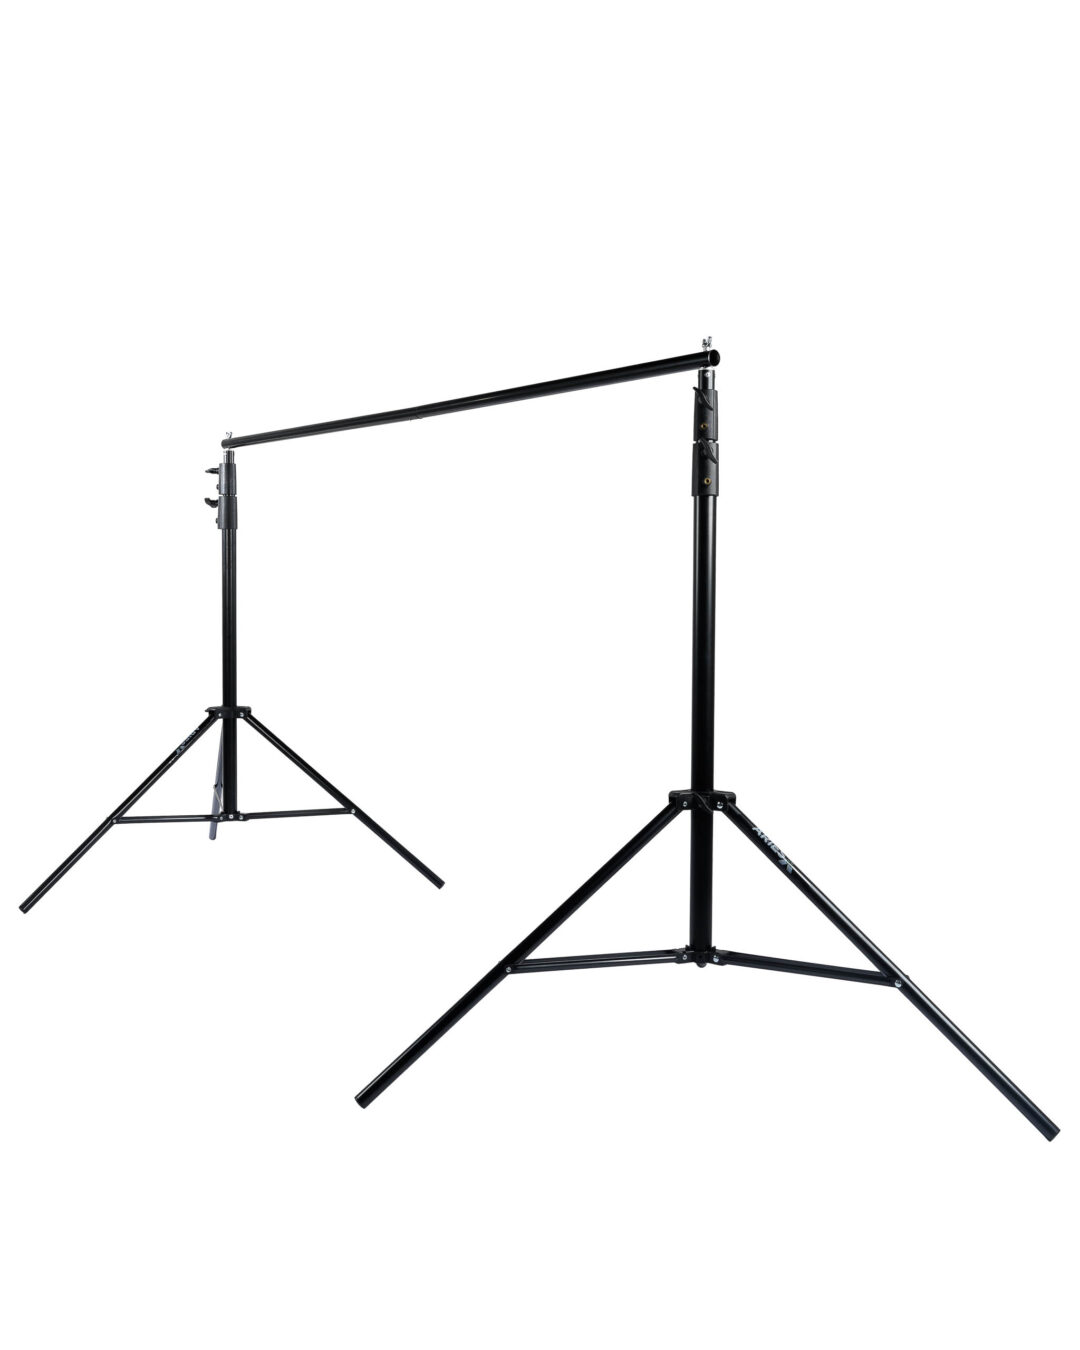 AX-WU-BSA-1009 AriesX StarX Backdrop Stand for Photography (1)